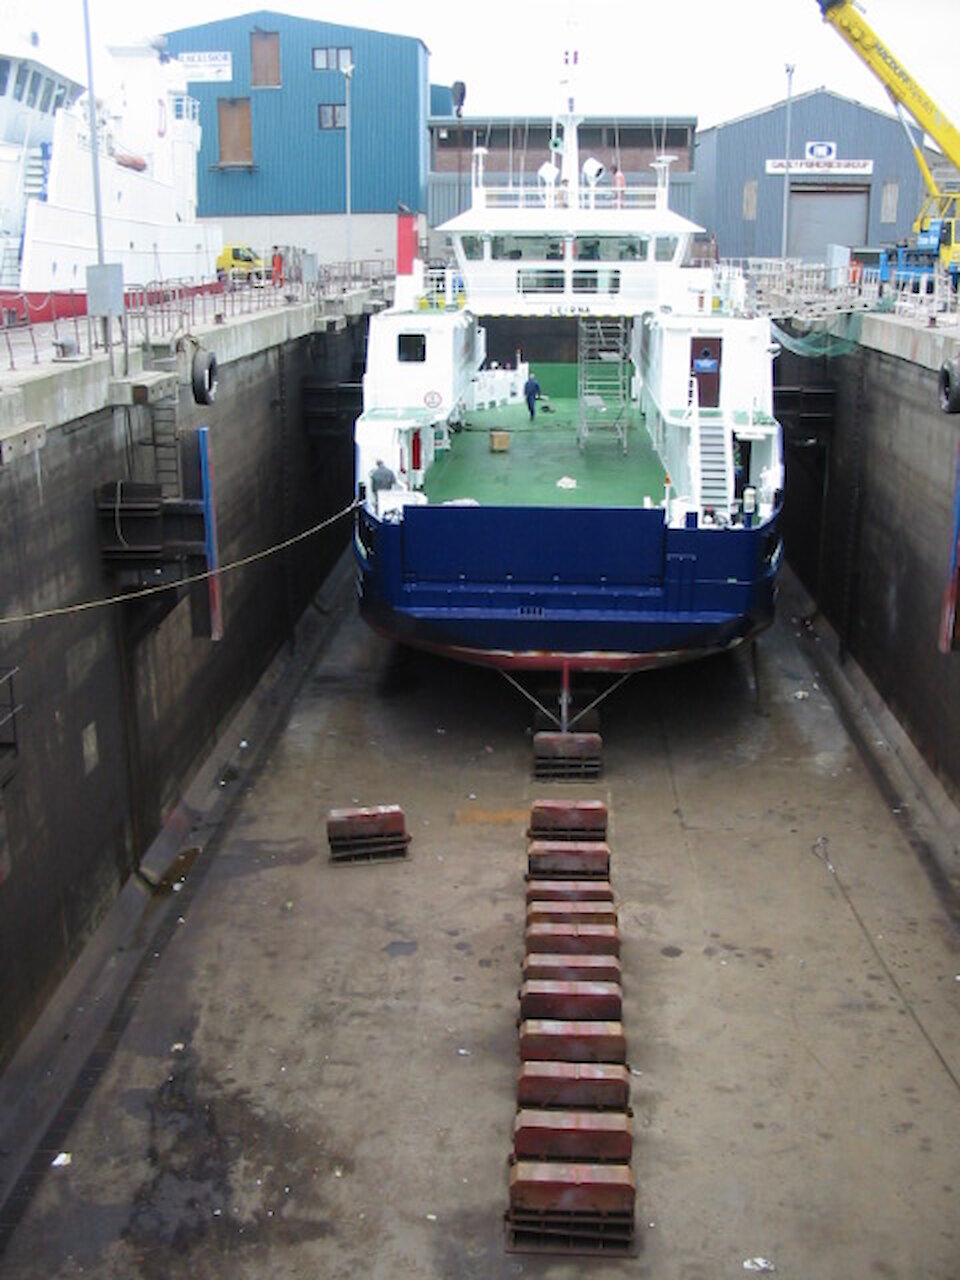 Fraserburgh Dry Dock with a Shetland inter-isle ferry being serviced